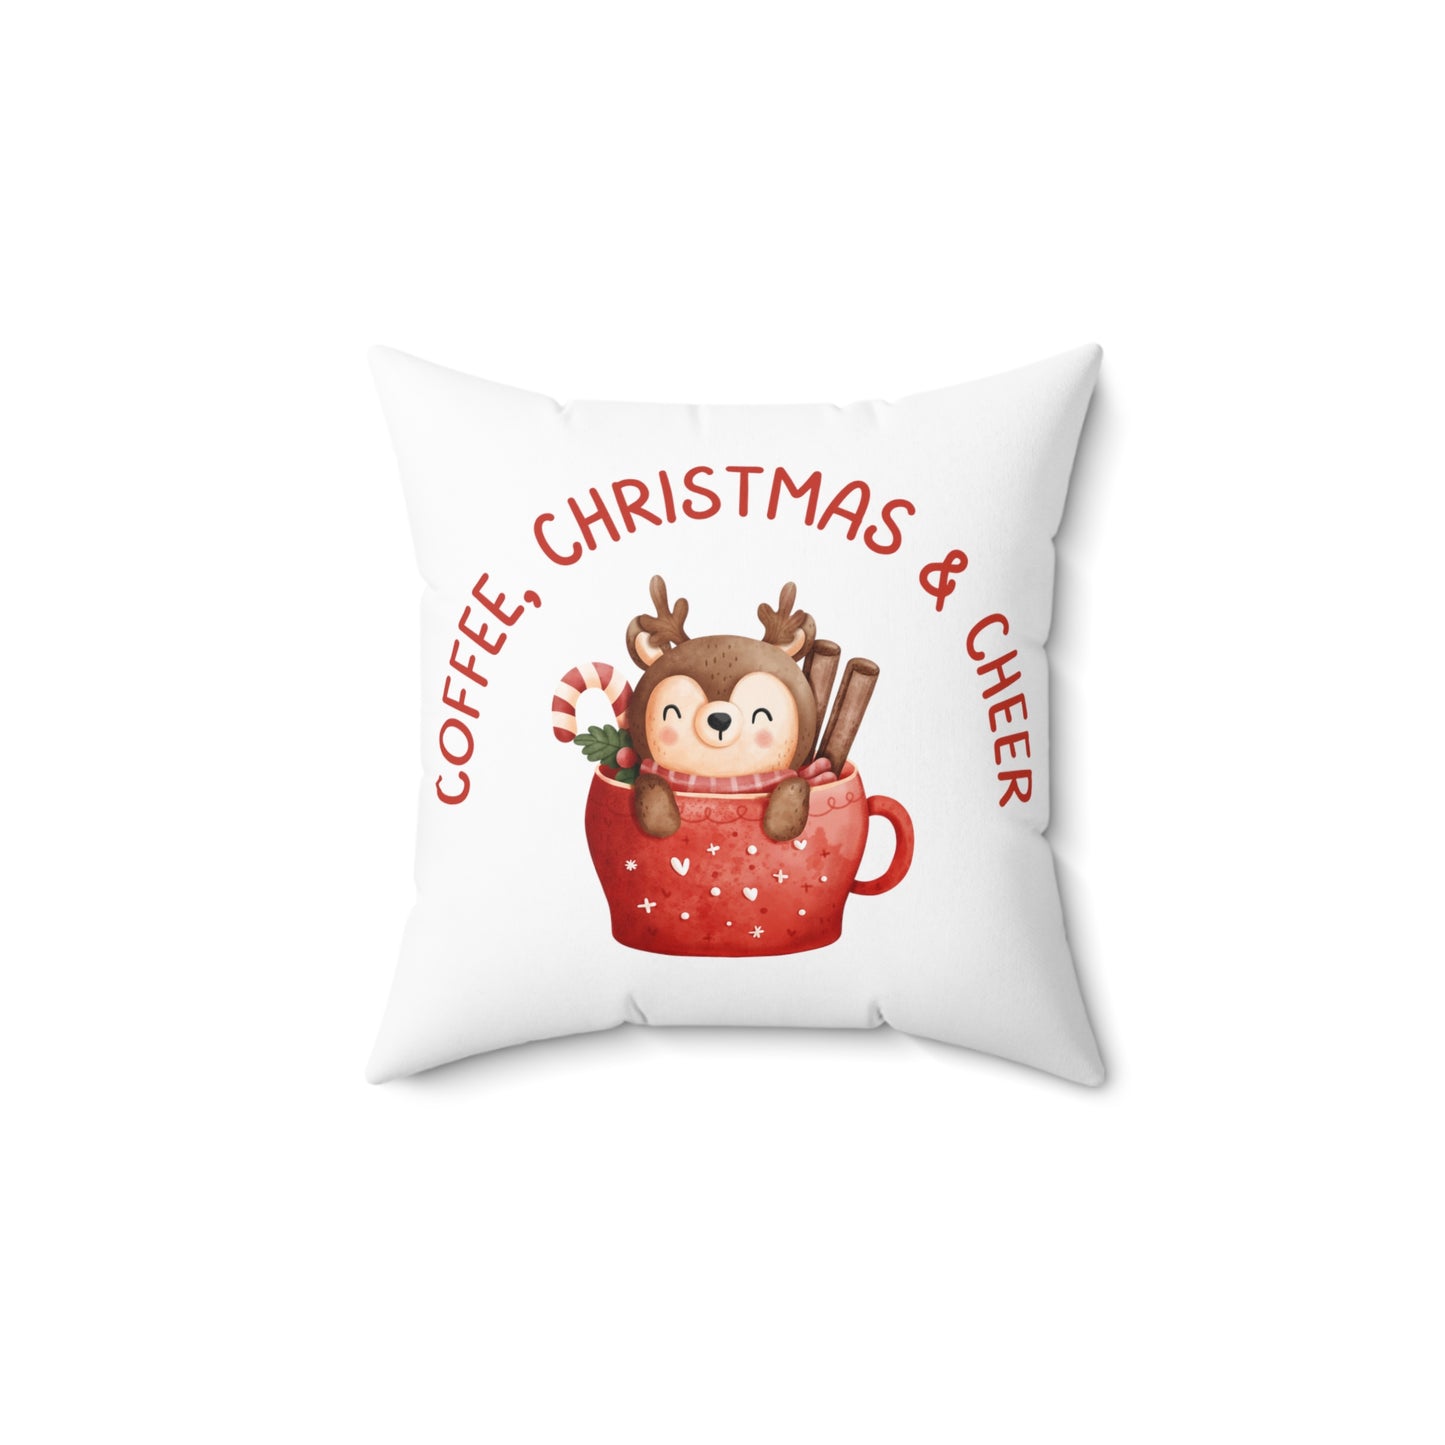 Coffee, Chirstmas and Cheer Printed Polyester Square Pillow